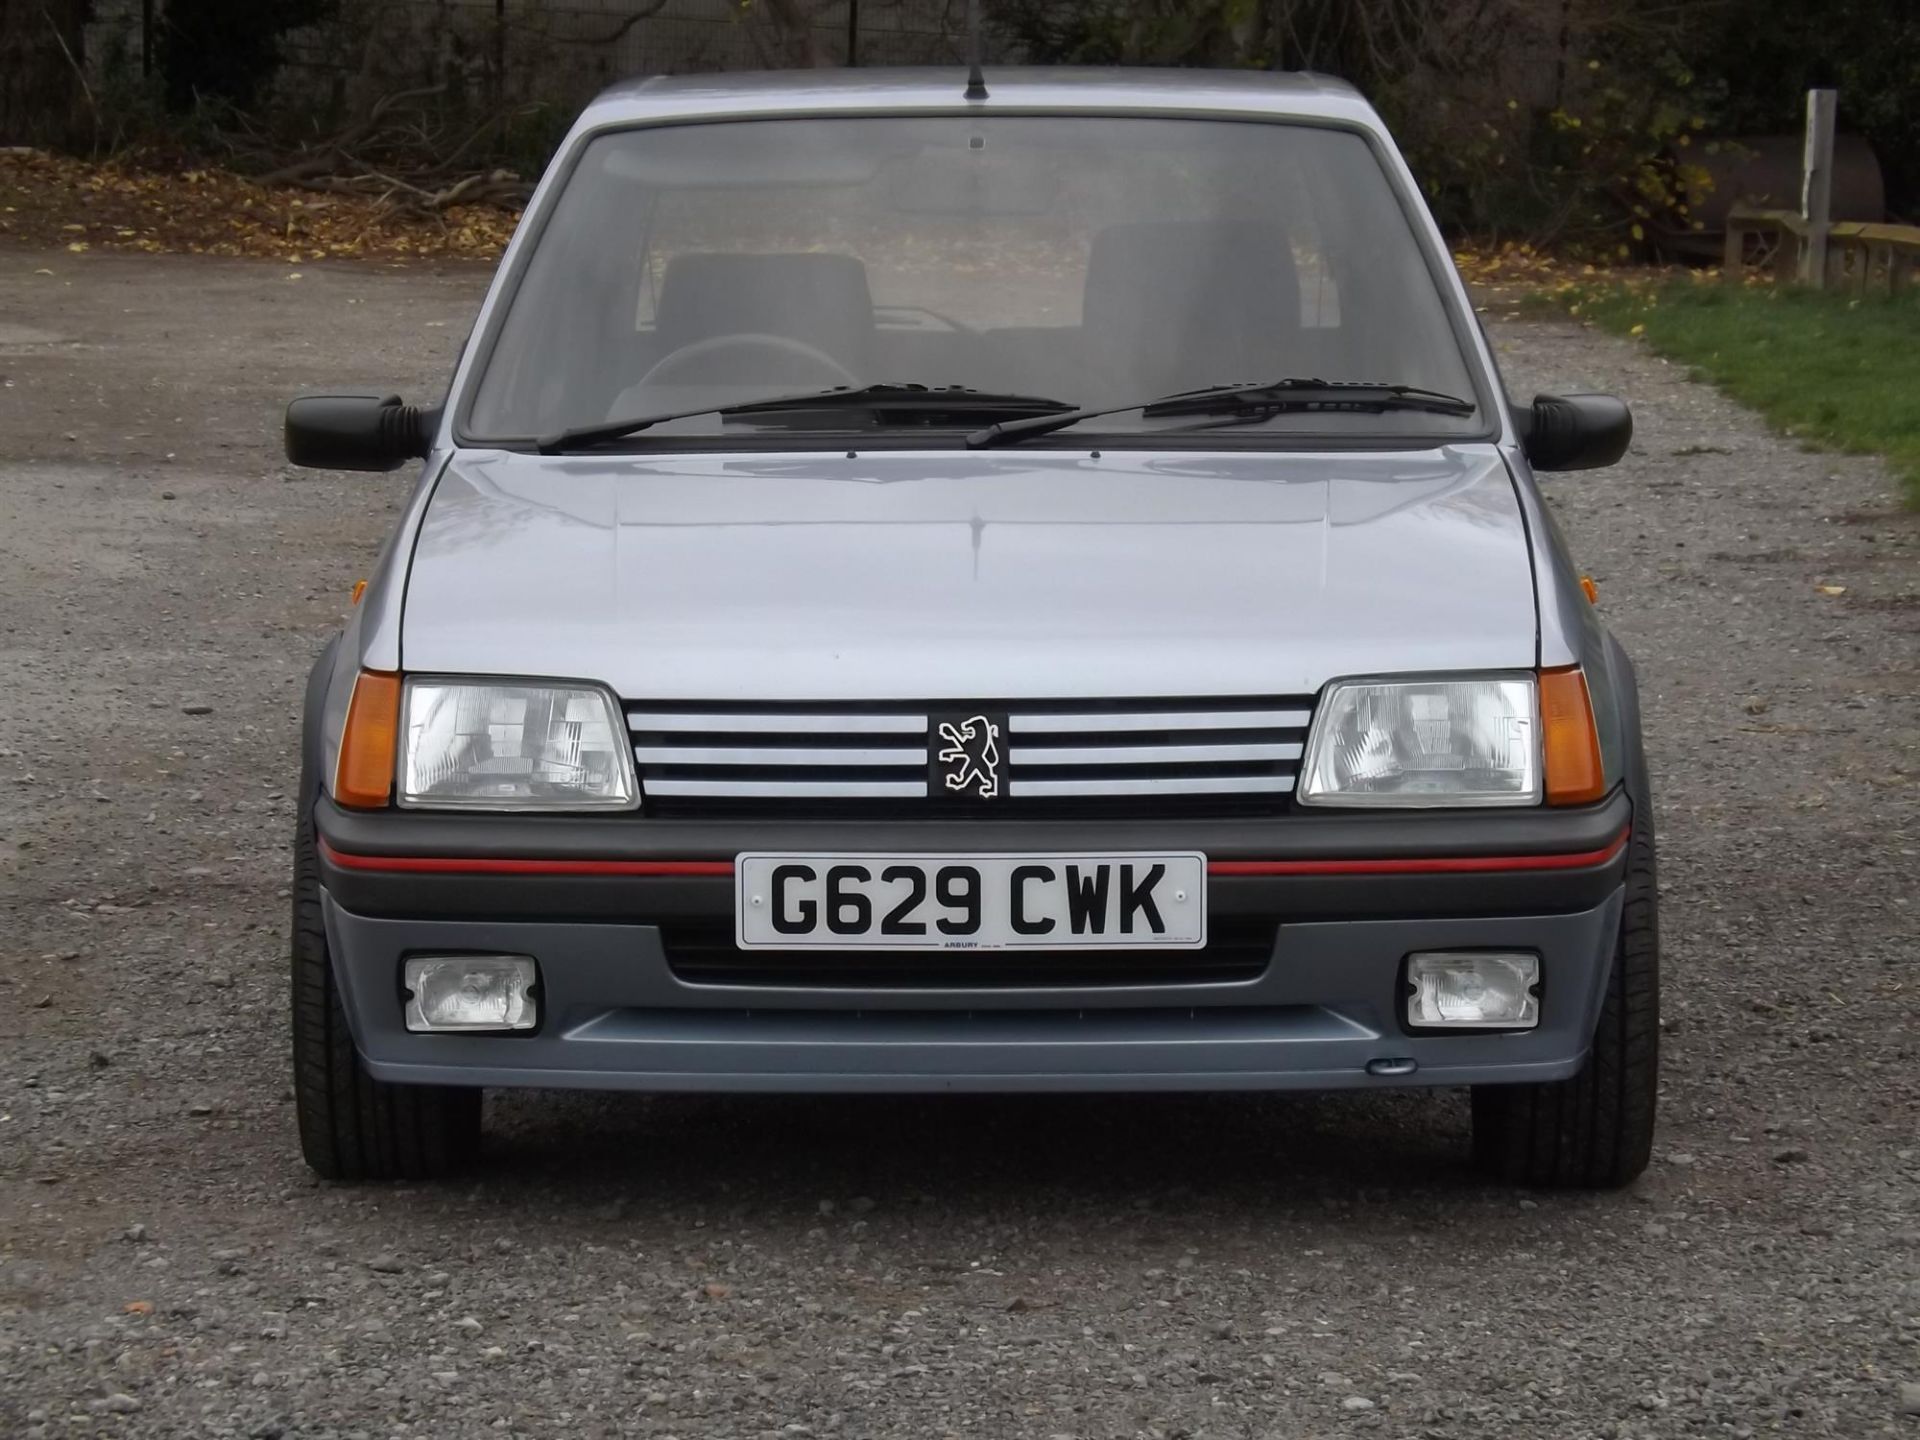 1990 Peugeot 205 GTi 1.6 (Phase 2) - Image 6 of 10